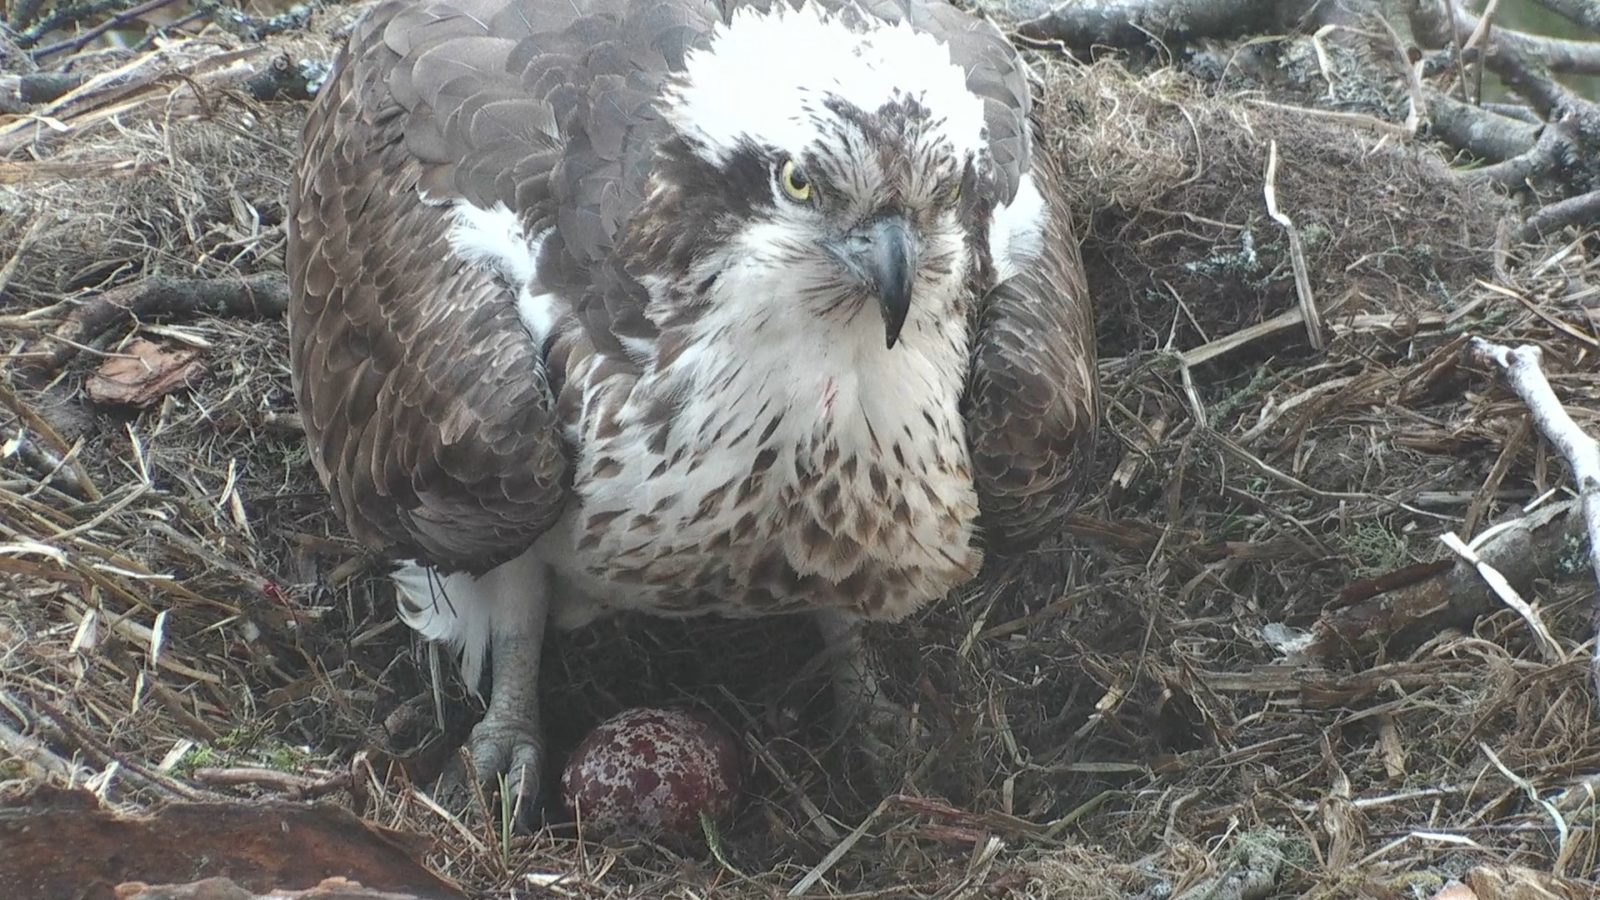 Osprey LF15 (Lassie) with her first egg at Loch of the Lowes Scottish Wildlife Reserve in 2017.